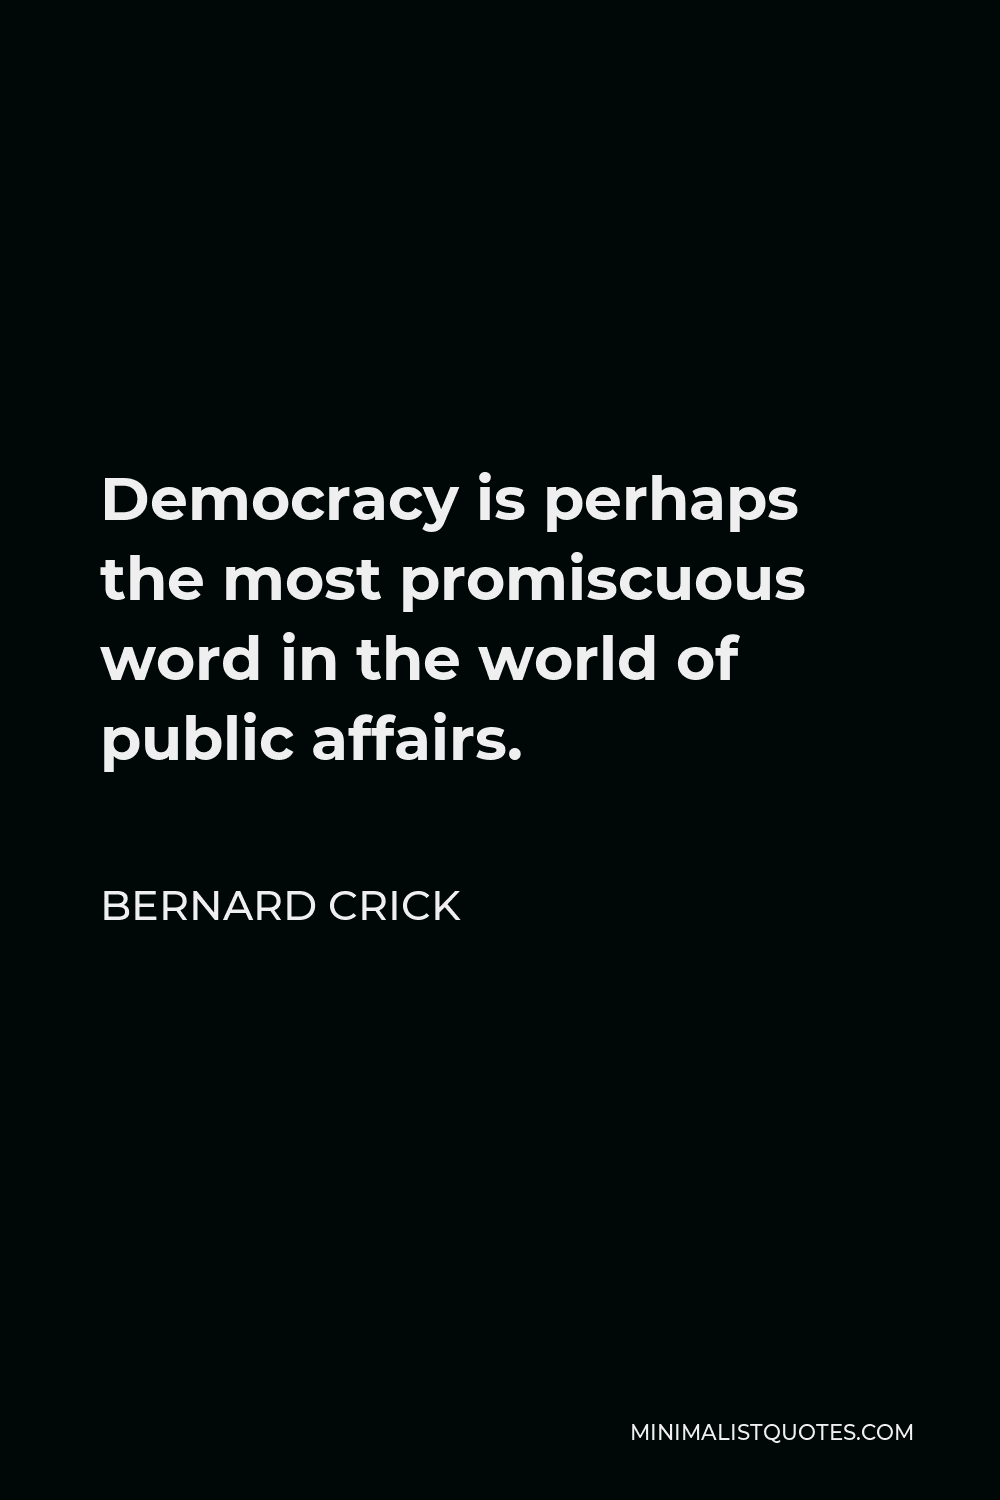 Bernard Crick Quote - Democracy is perhaps the most promiscuous word in the world of public affairs.